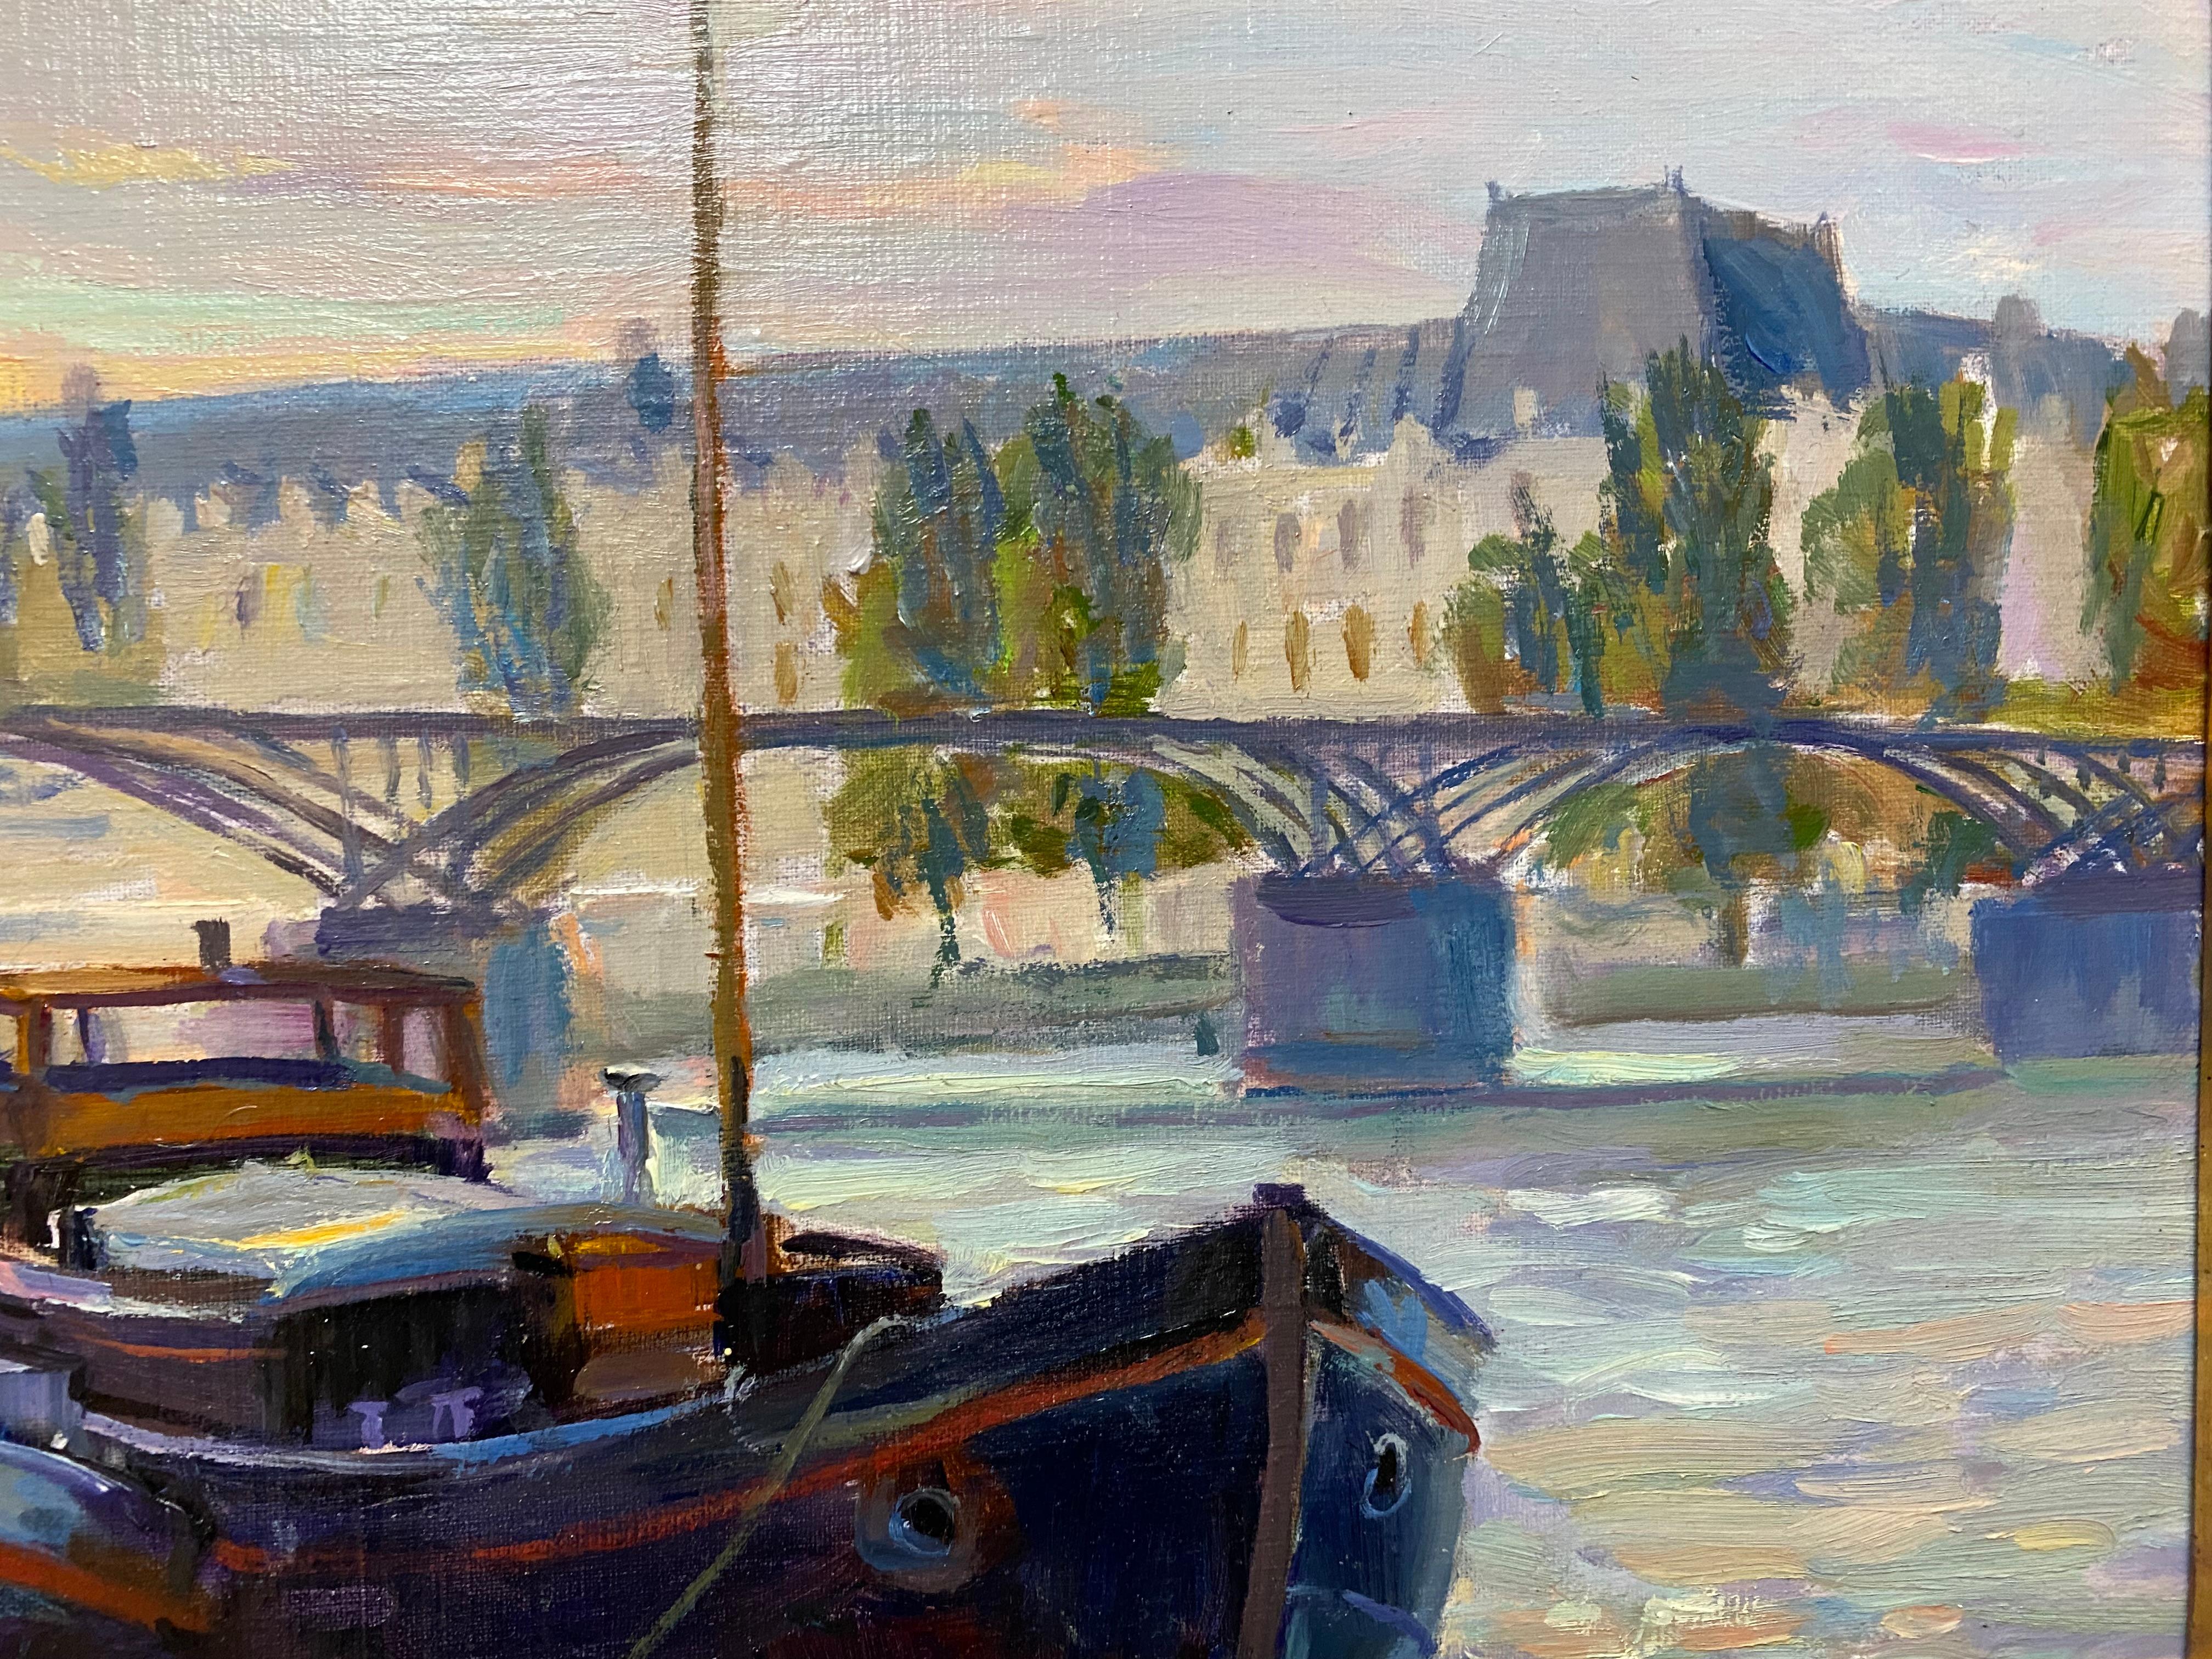 The Seine River winds through Paris as though commissioned to secure the centuries of secrets that it has beheld these many years. Barges near the internationally famed Louvre Museum of Fine Art assist with essential transport as well as to solidify